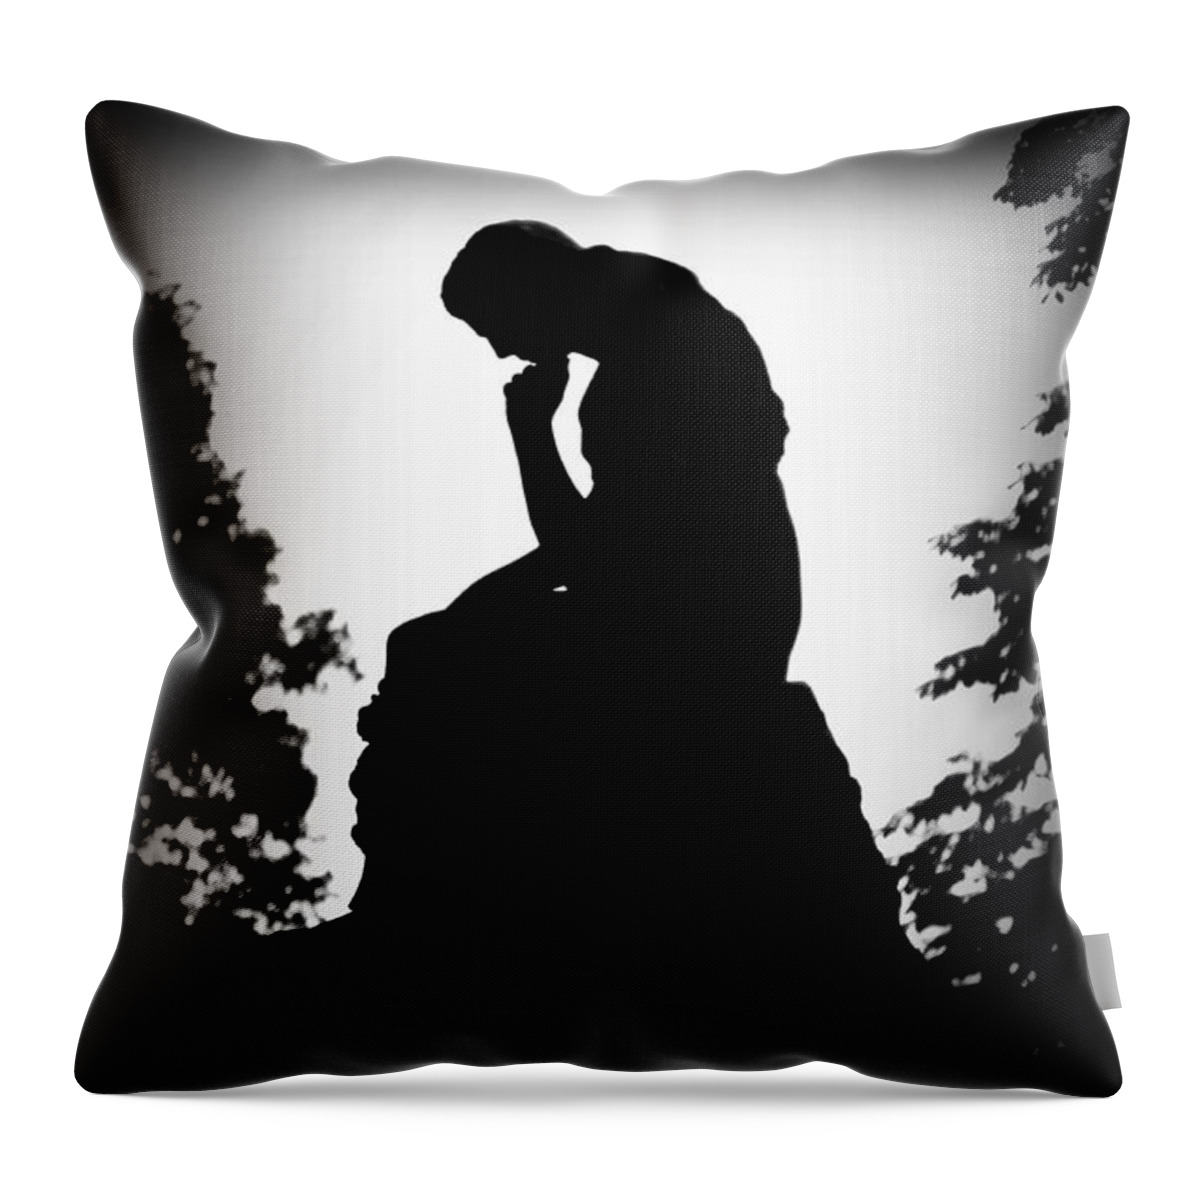 Philadelphia Throw Pillow featuring the photograph Woman in Thought by Bill Cannon